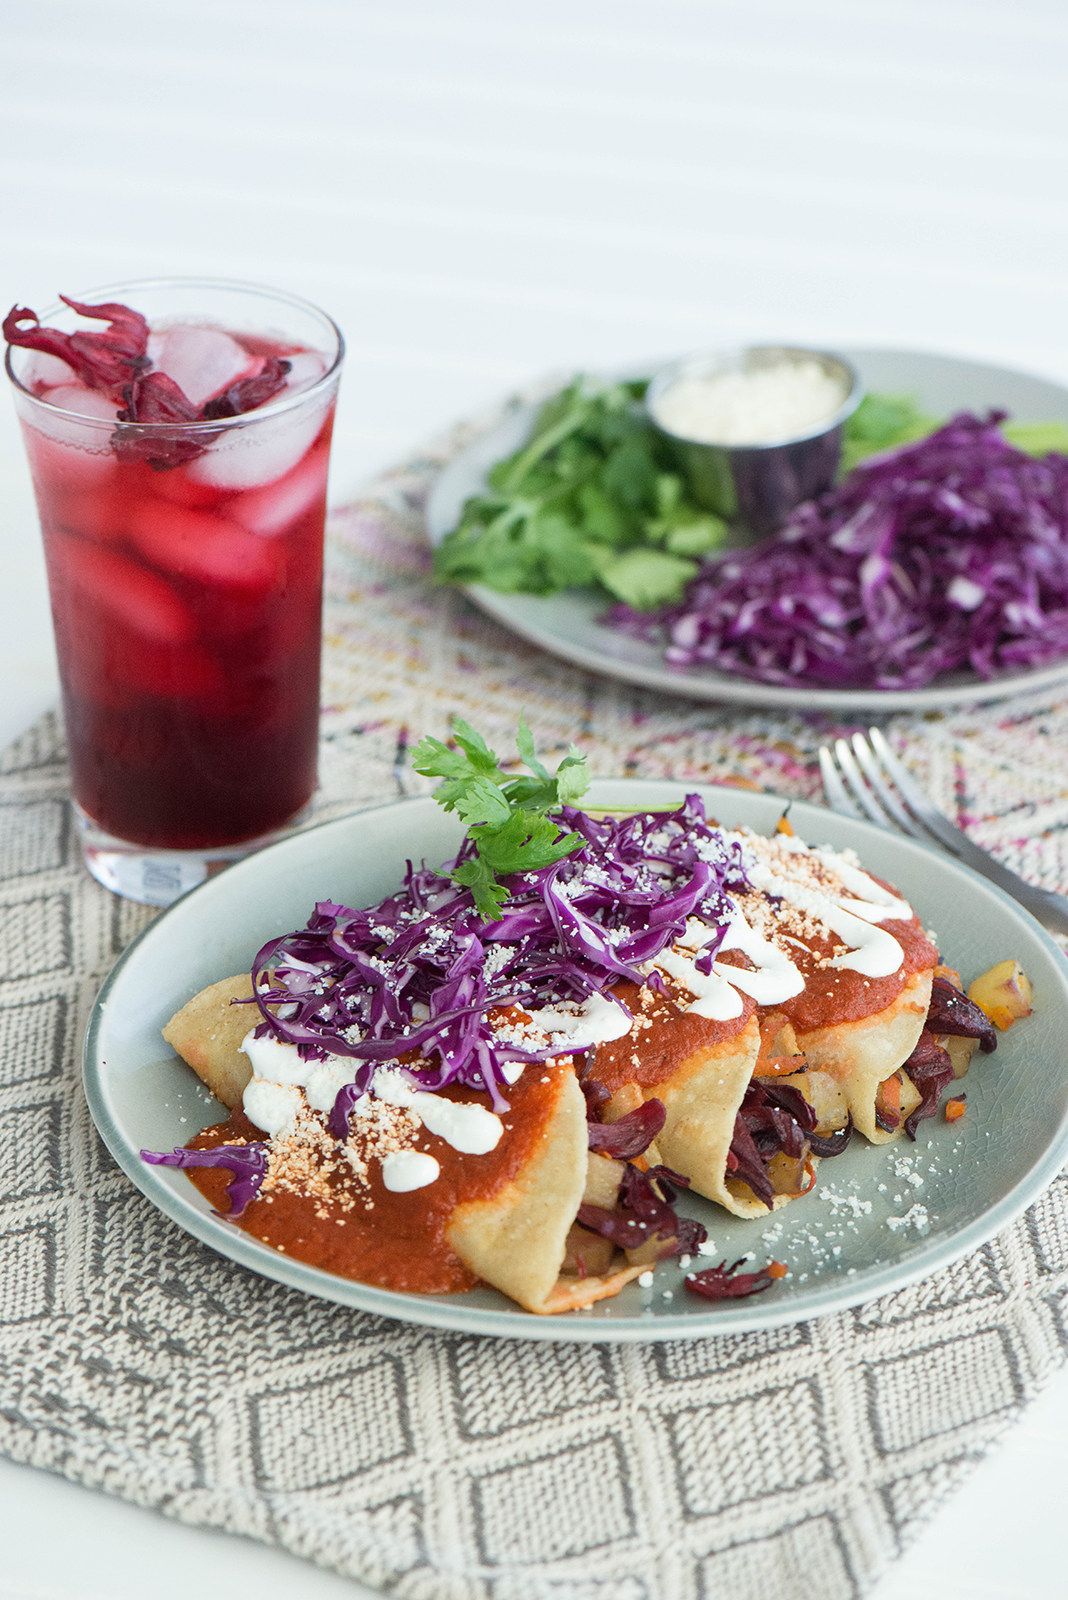 If you are looking for a great recipe, This is the one for you! The sauce is very mild and smoky, and the potatoes and carrots complement the tanginess of the hibiscus in the filling. It all works together perfectly. Top with a drizzle of crème fraiche, a sprinkle of Cotija cheese, a handful of cabbage, and a sprig of cilantro. Enjoy! For more recipe ideas visit landolakes.com or follow along on Facebook, Instagram or Twitter.